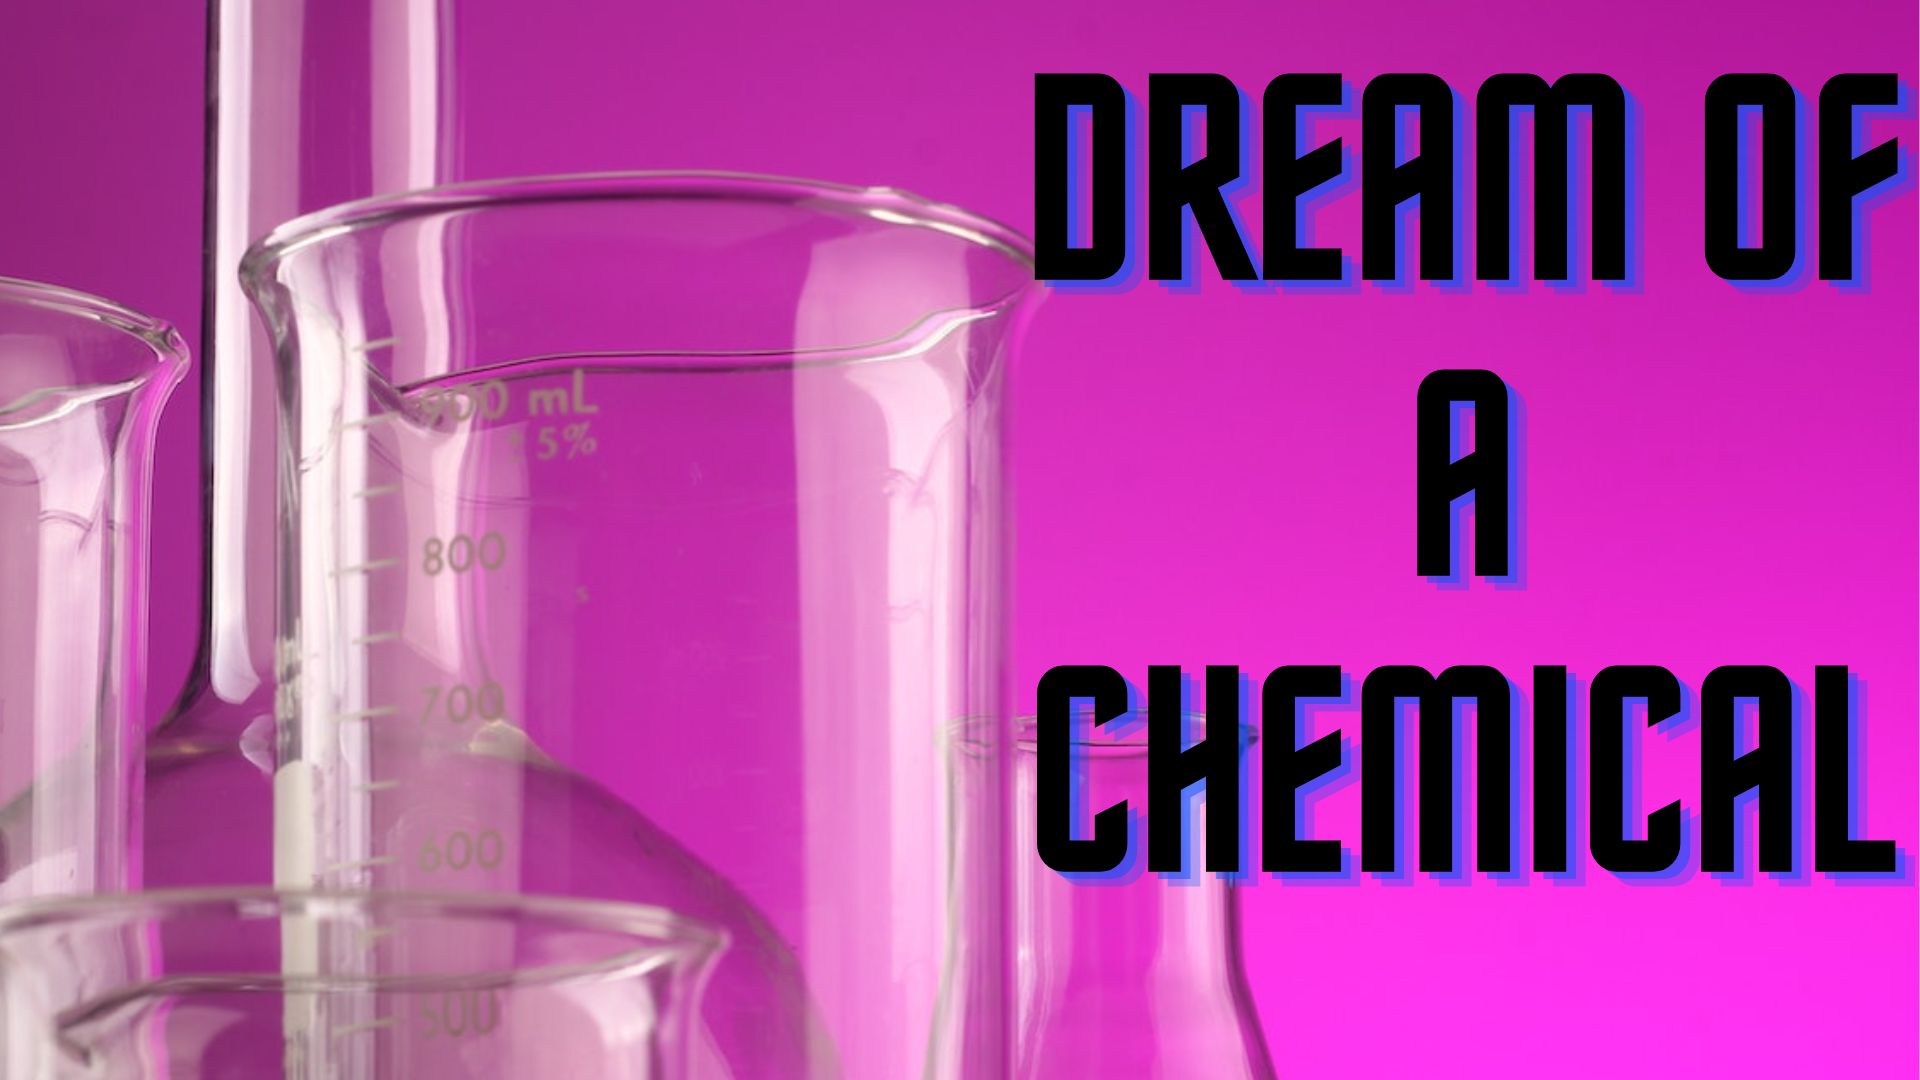 Dream Of A Chemical - Represents A Forced Or Guaranteed Reaction